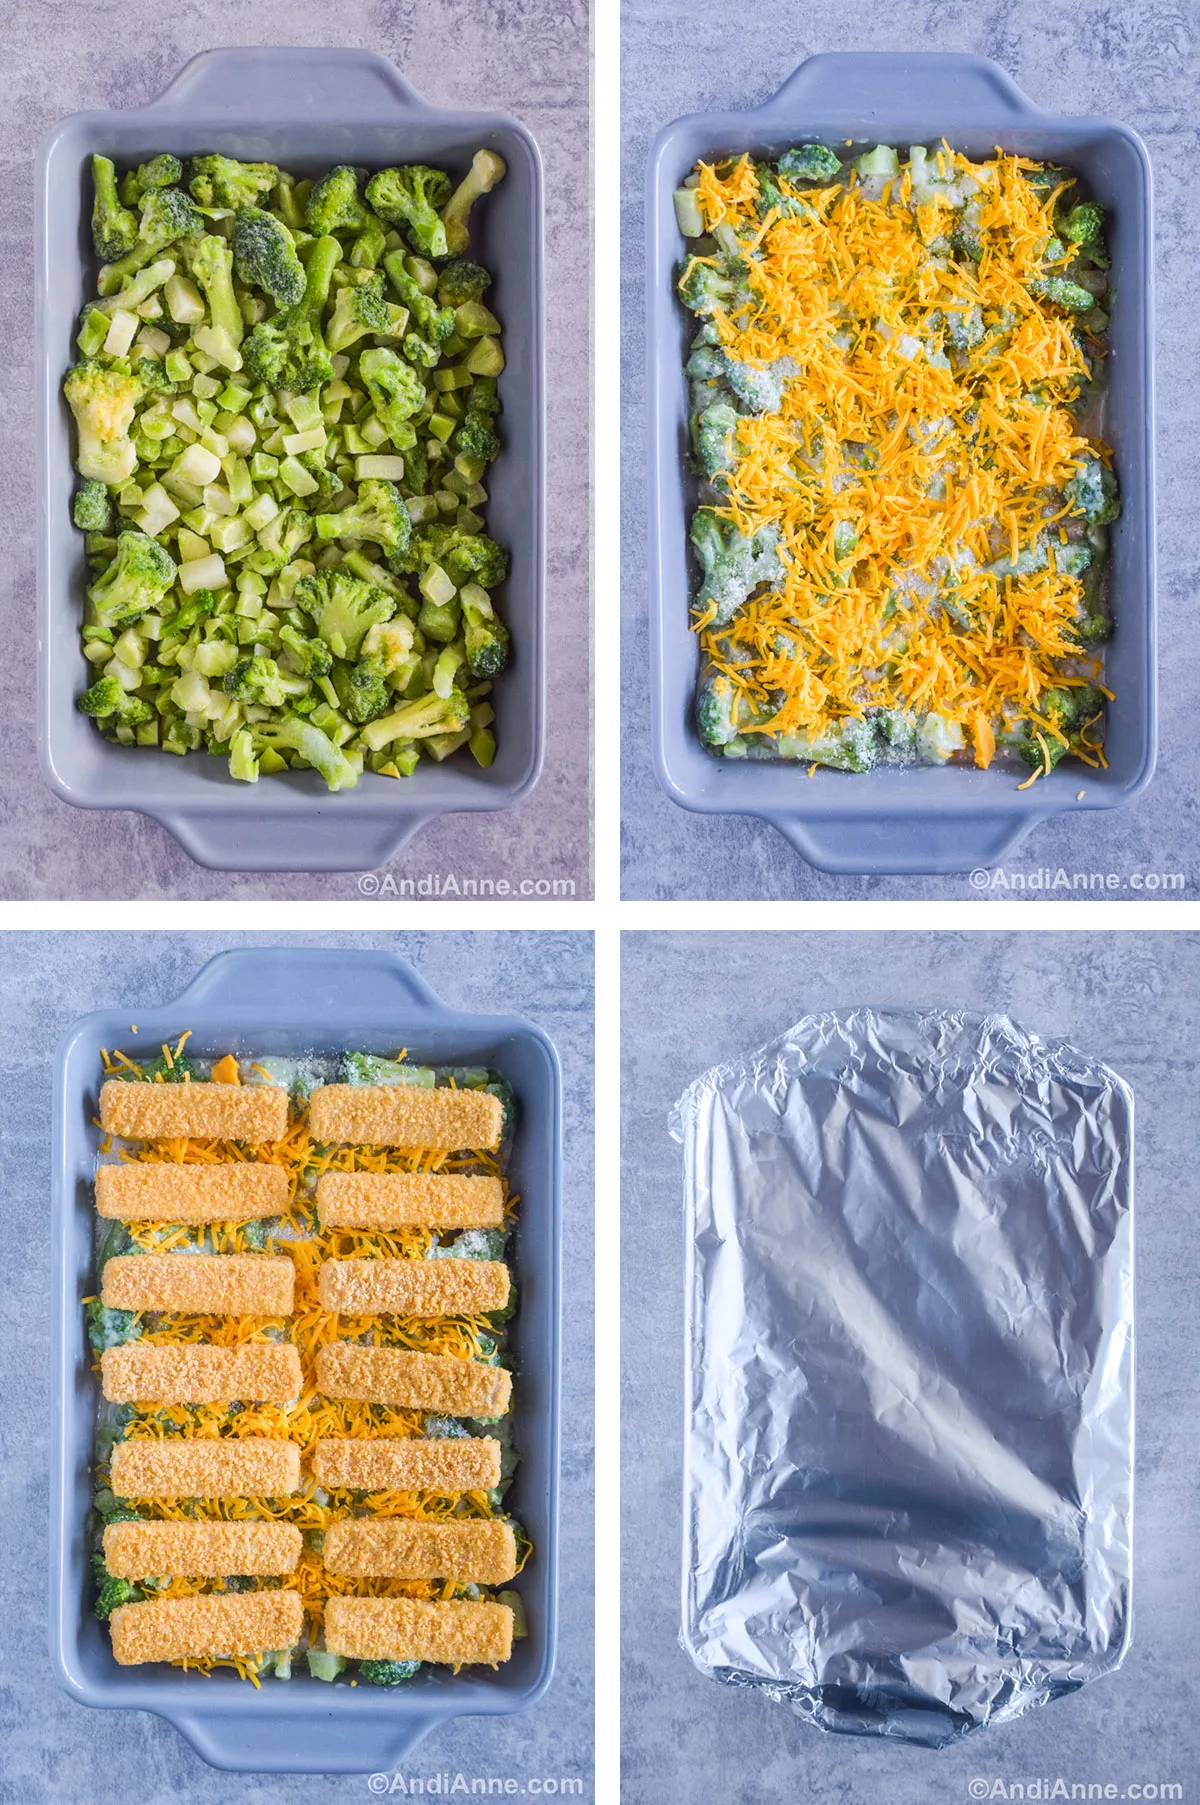 Four images showing steps to make recipe. First is frozen broccoli pieces in grey casserole dish, second is shredded cheese on top, third is frozen fish sticks in two rows on top of the casserole dish, fourth image is foil covering the casserole dish.